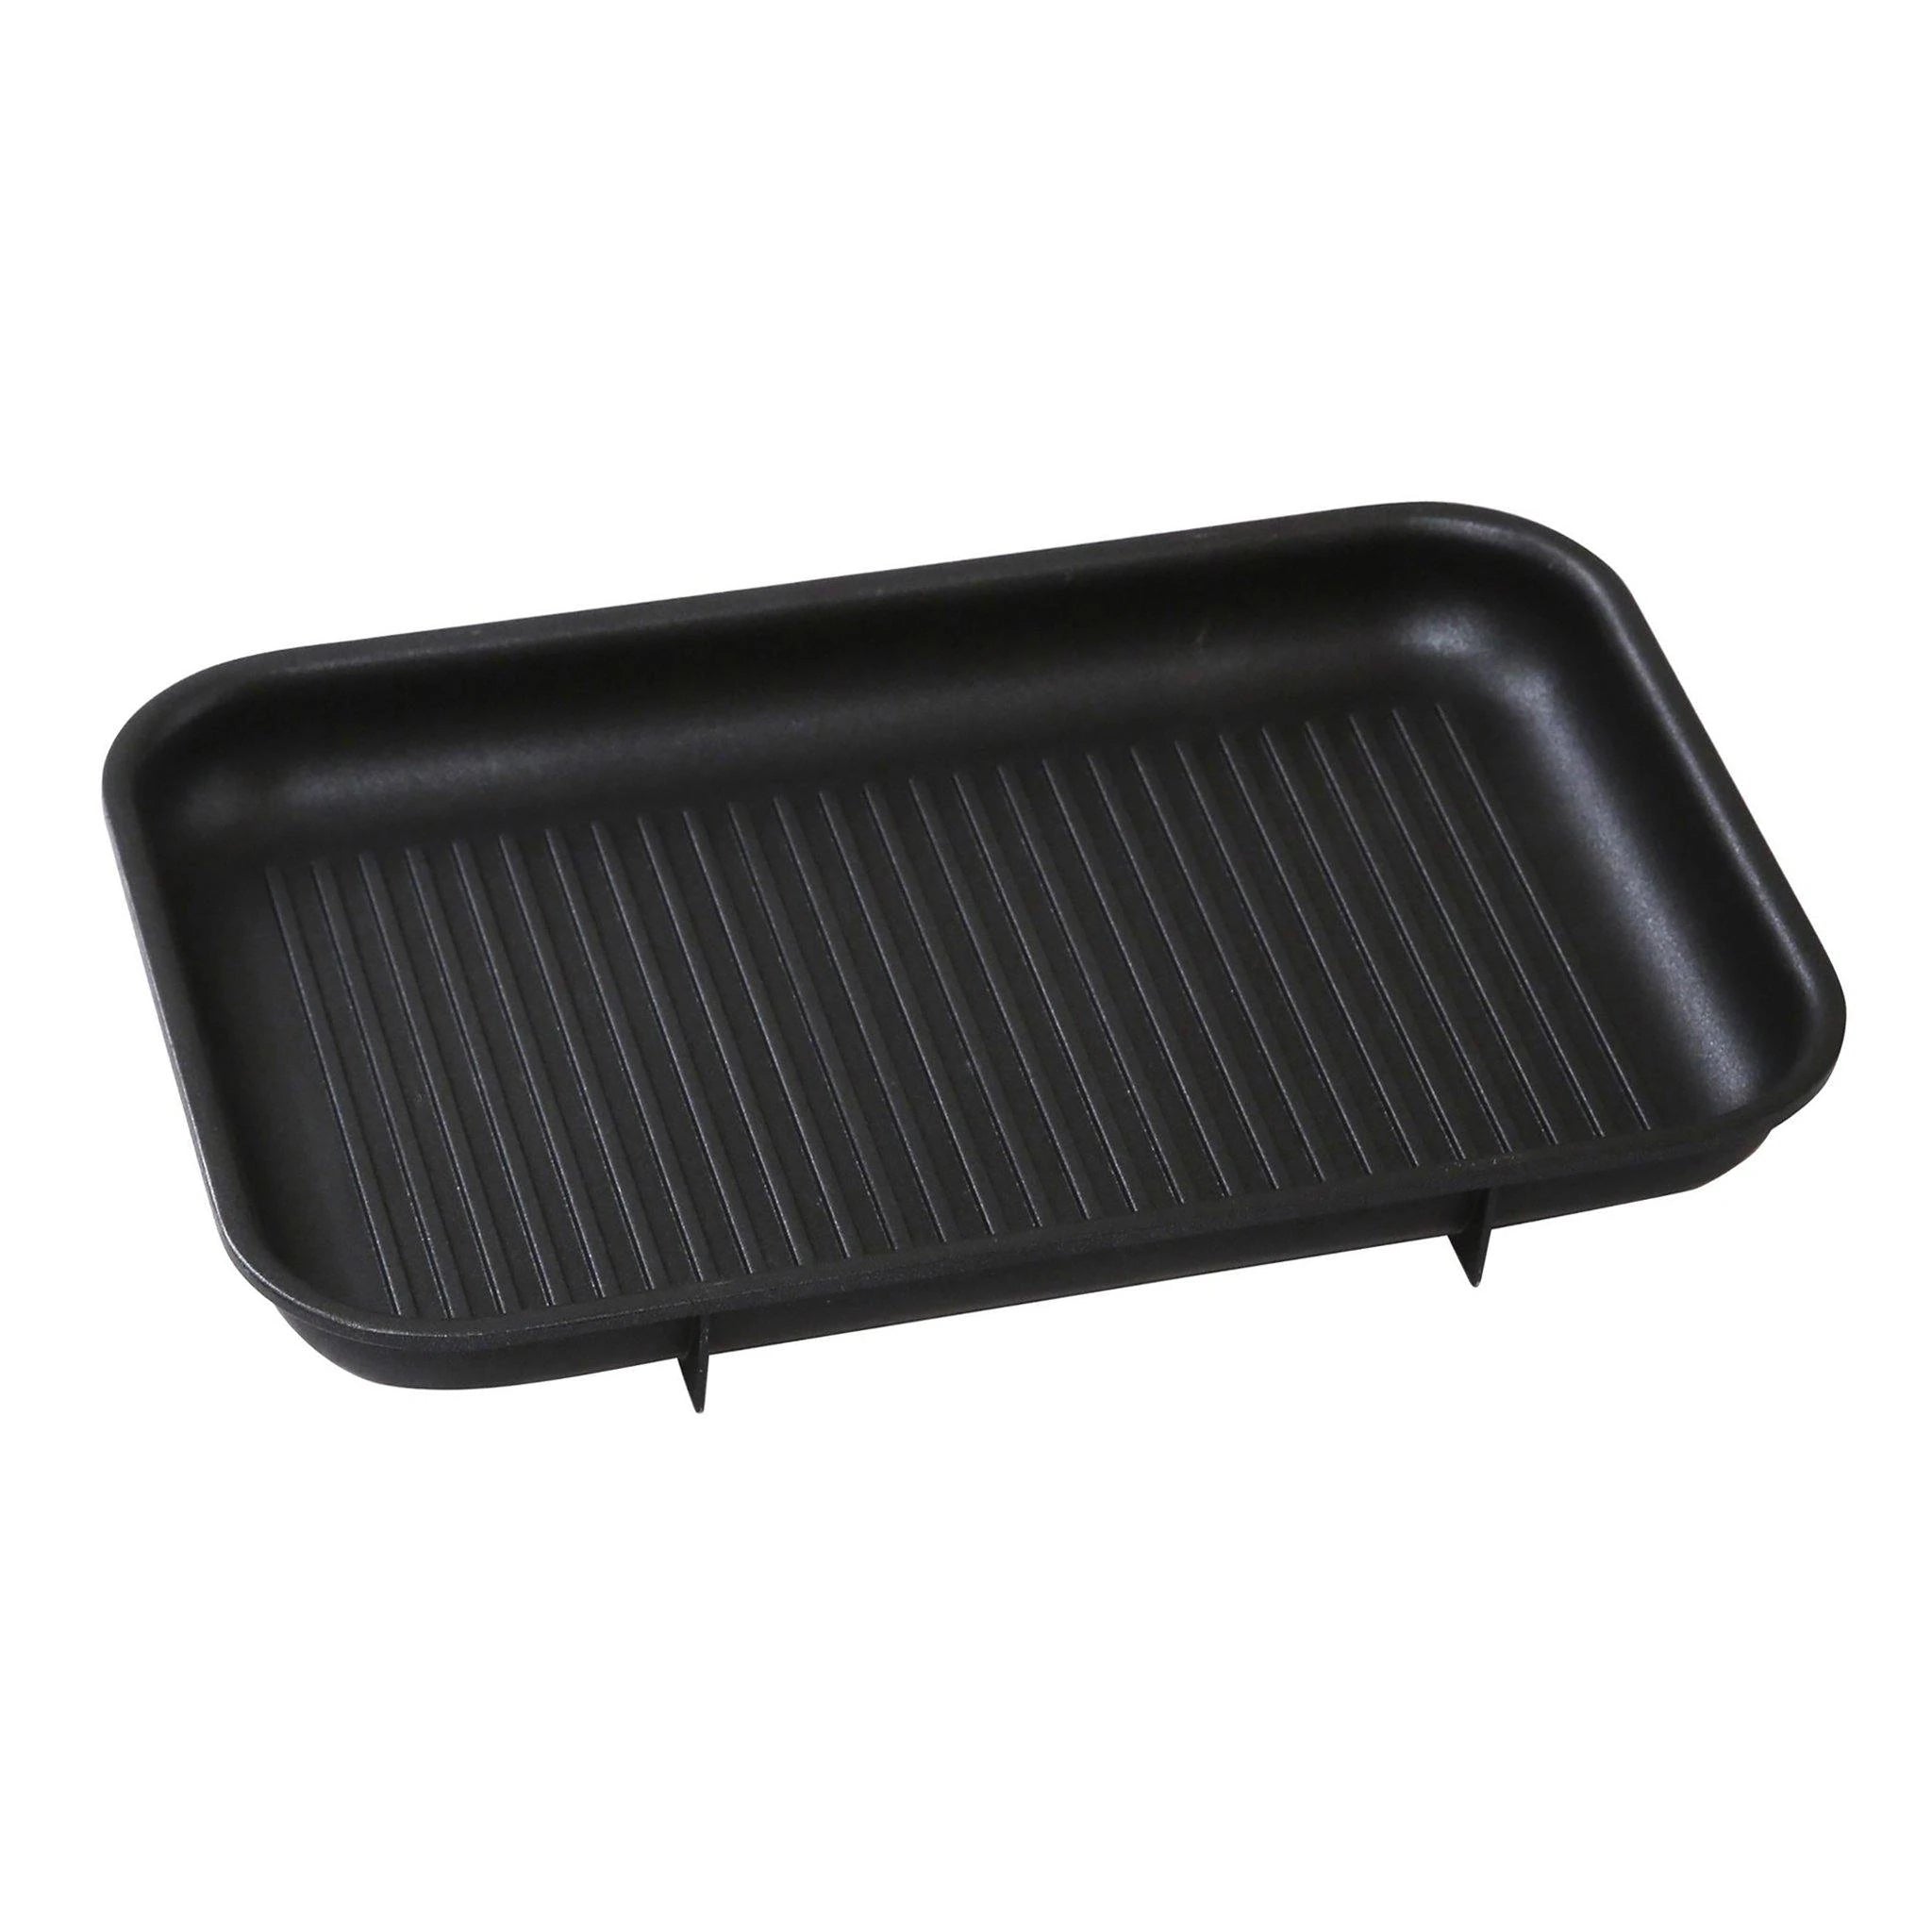 BRUNO Grill Plate (for The Grande size)